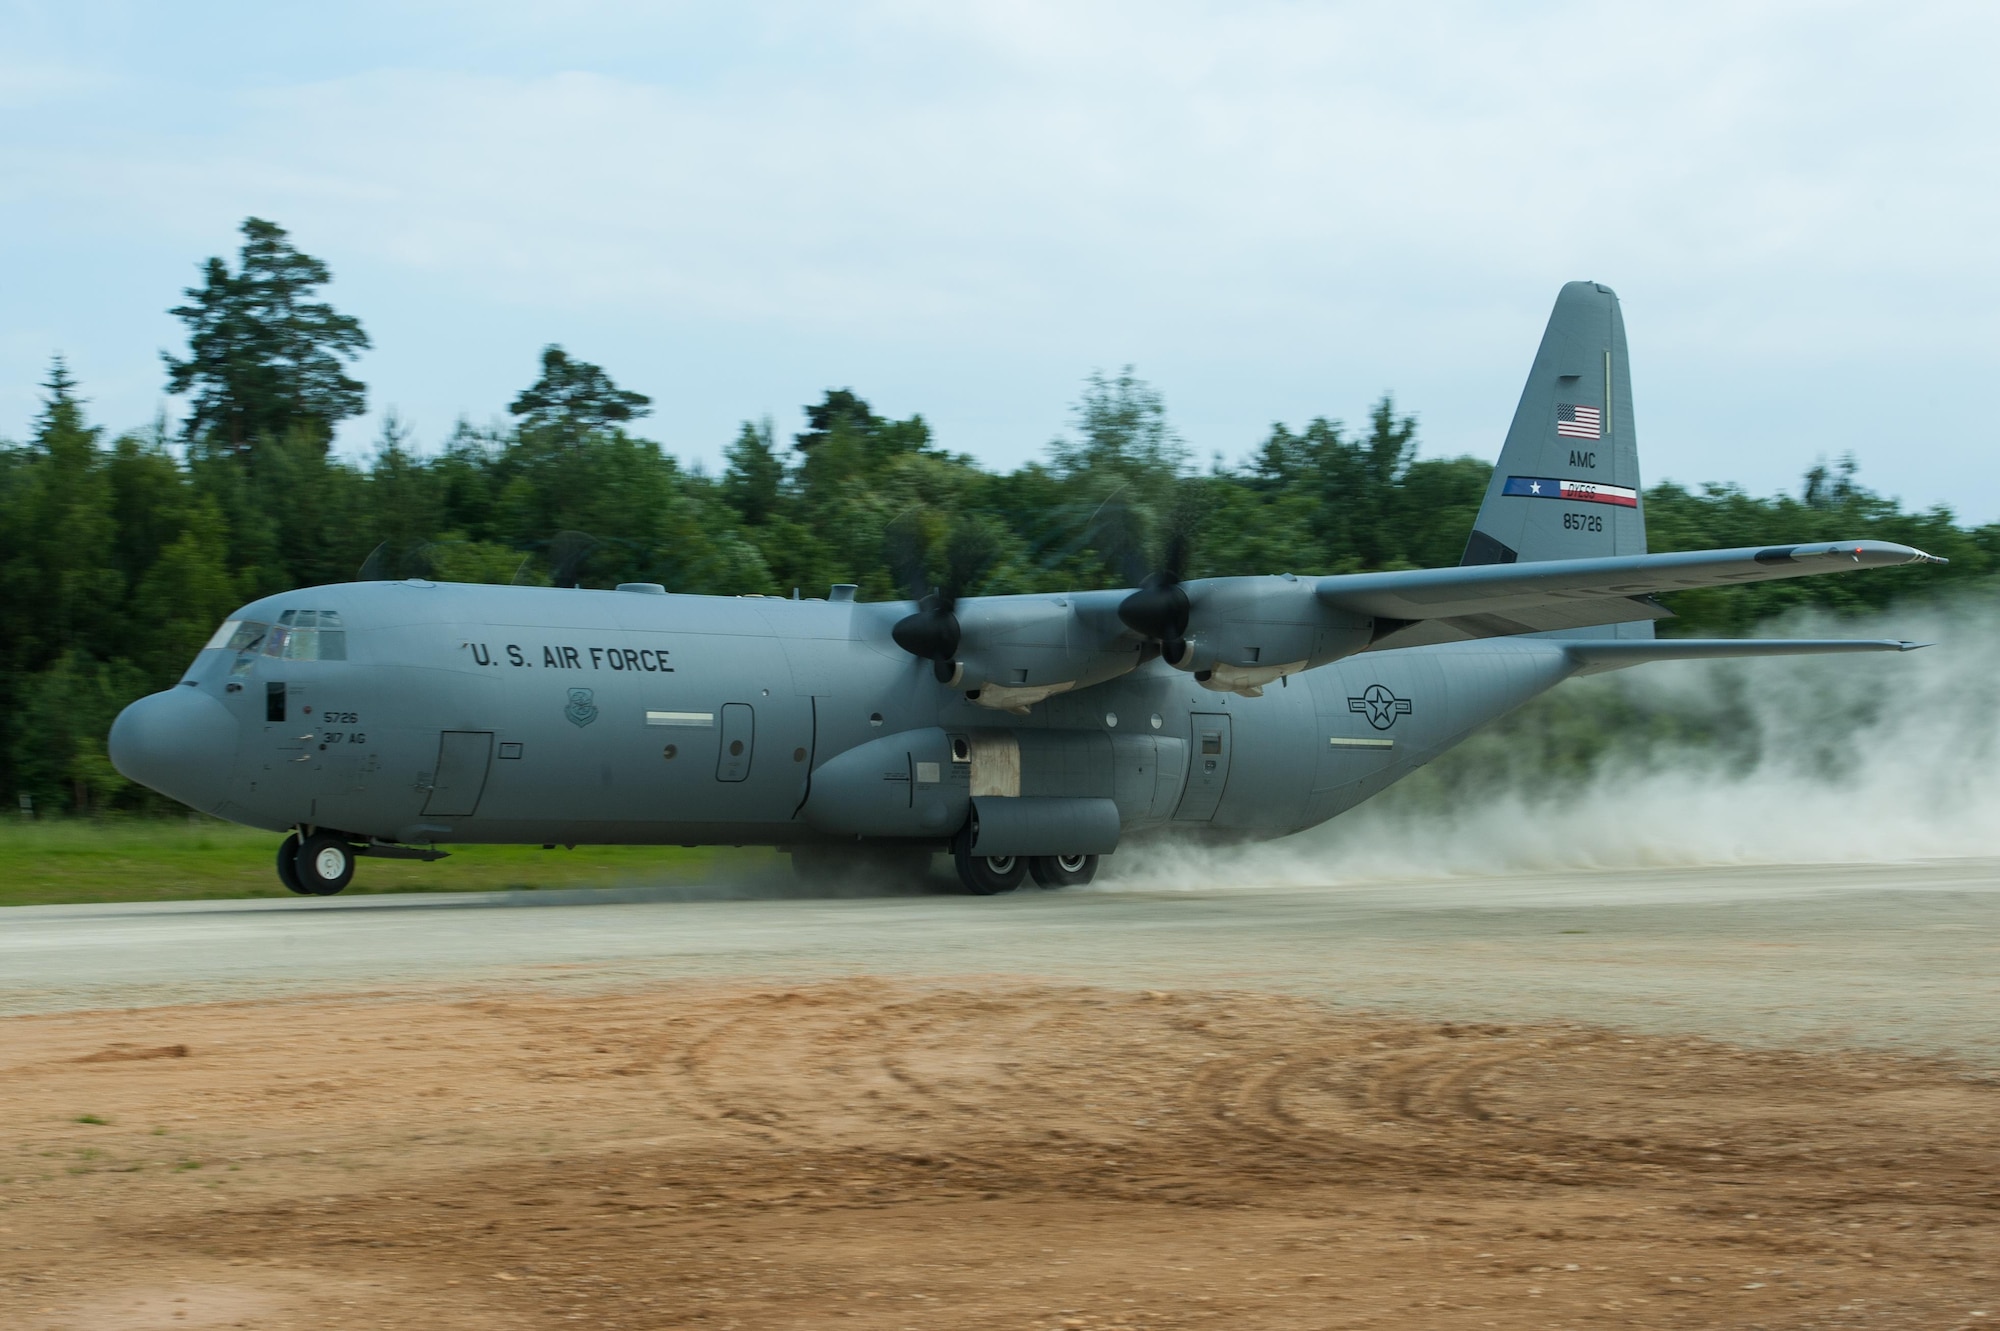 A C-130J Super Hercules from Dyess Air Force Base, Texas, takes off during exercise Swift Response 16 at Hohenfels Training Area, Germany, June 17, 2016. Swift Response is one of the premier military crisis response training events for multinational airborne forces in the world. This year, the exercise had more than 5,000 participants from 10 NATO nations. (U.S. Air Force photo/Master Sgt. Joseph Swafford)